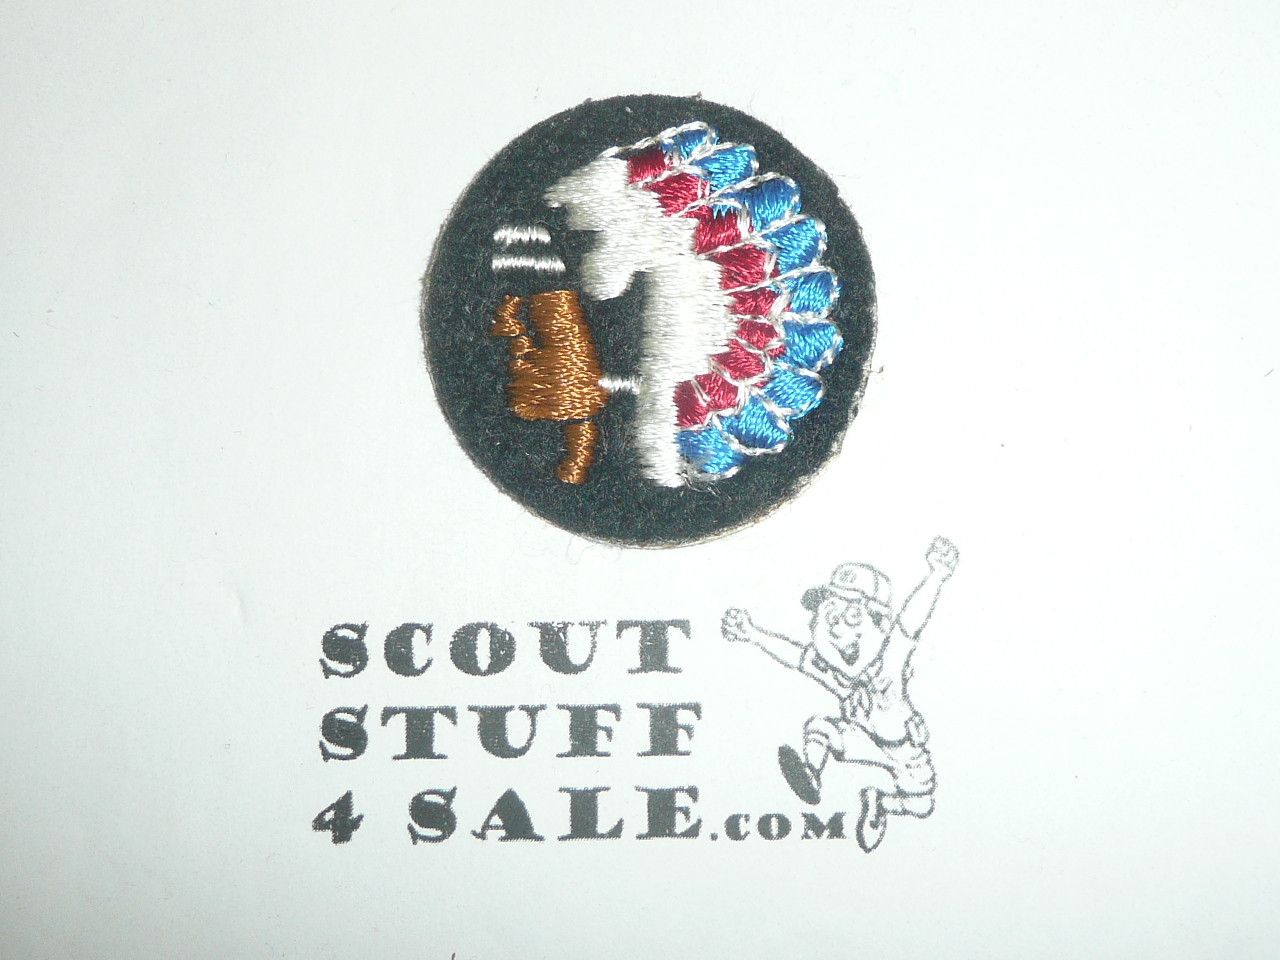 Embroidered Indian Chief on Felt Patch with Sticker Back, used by Order of the Arrow Lodge Canalino #90